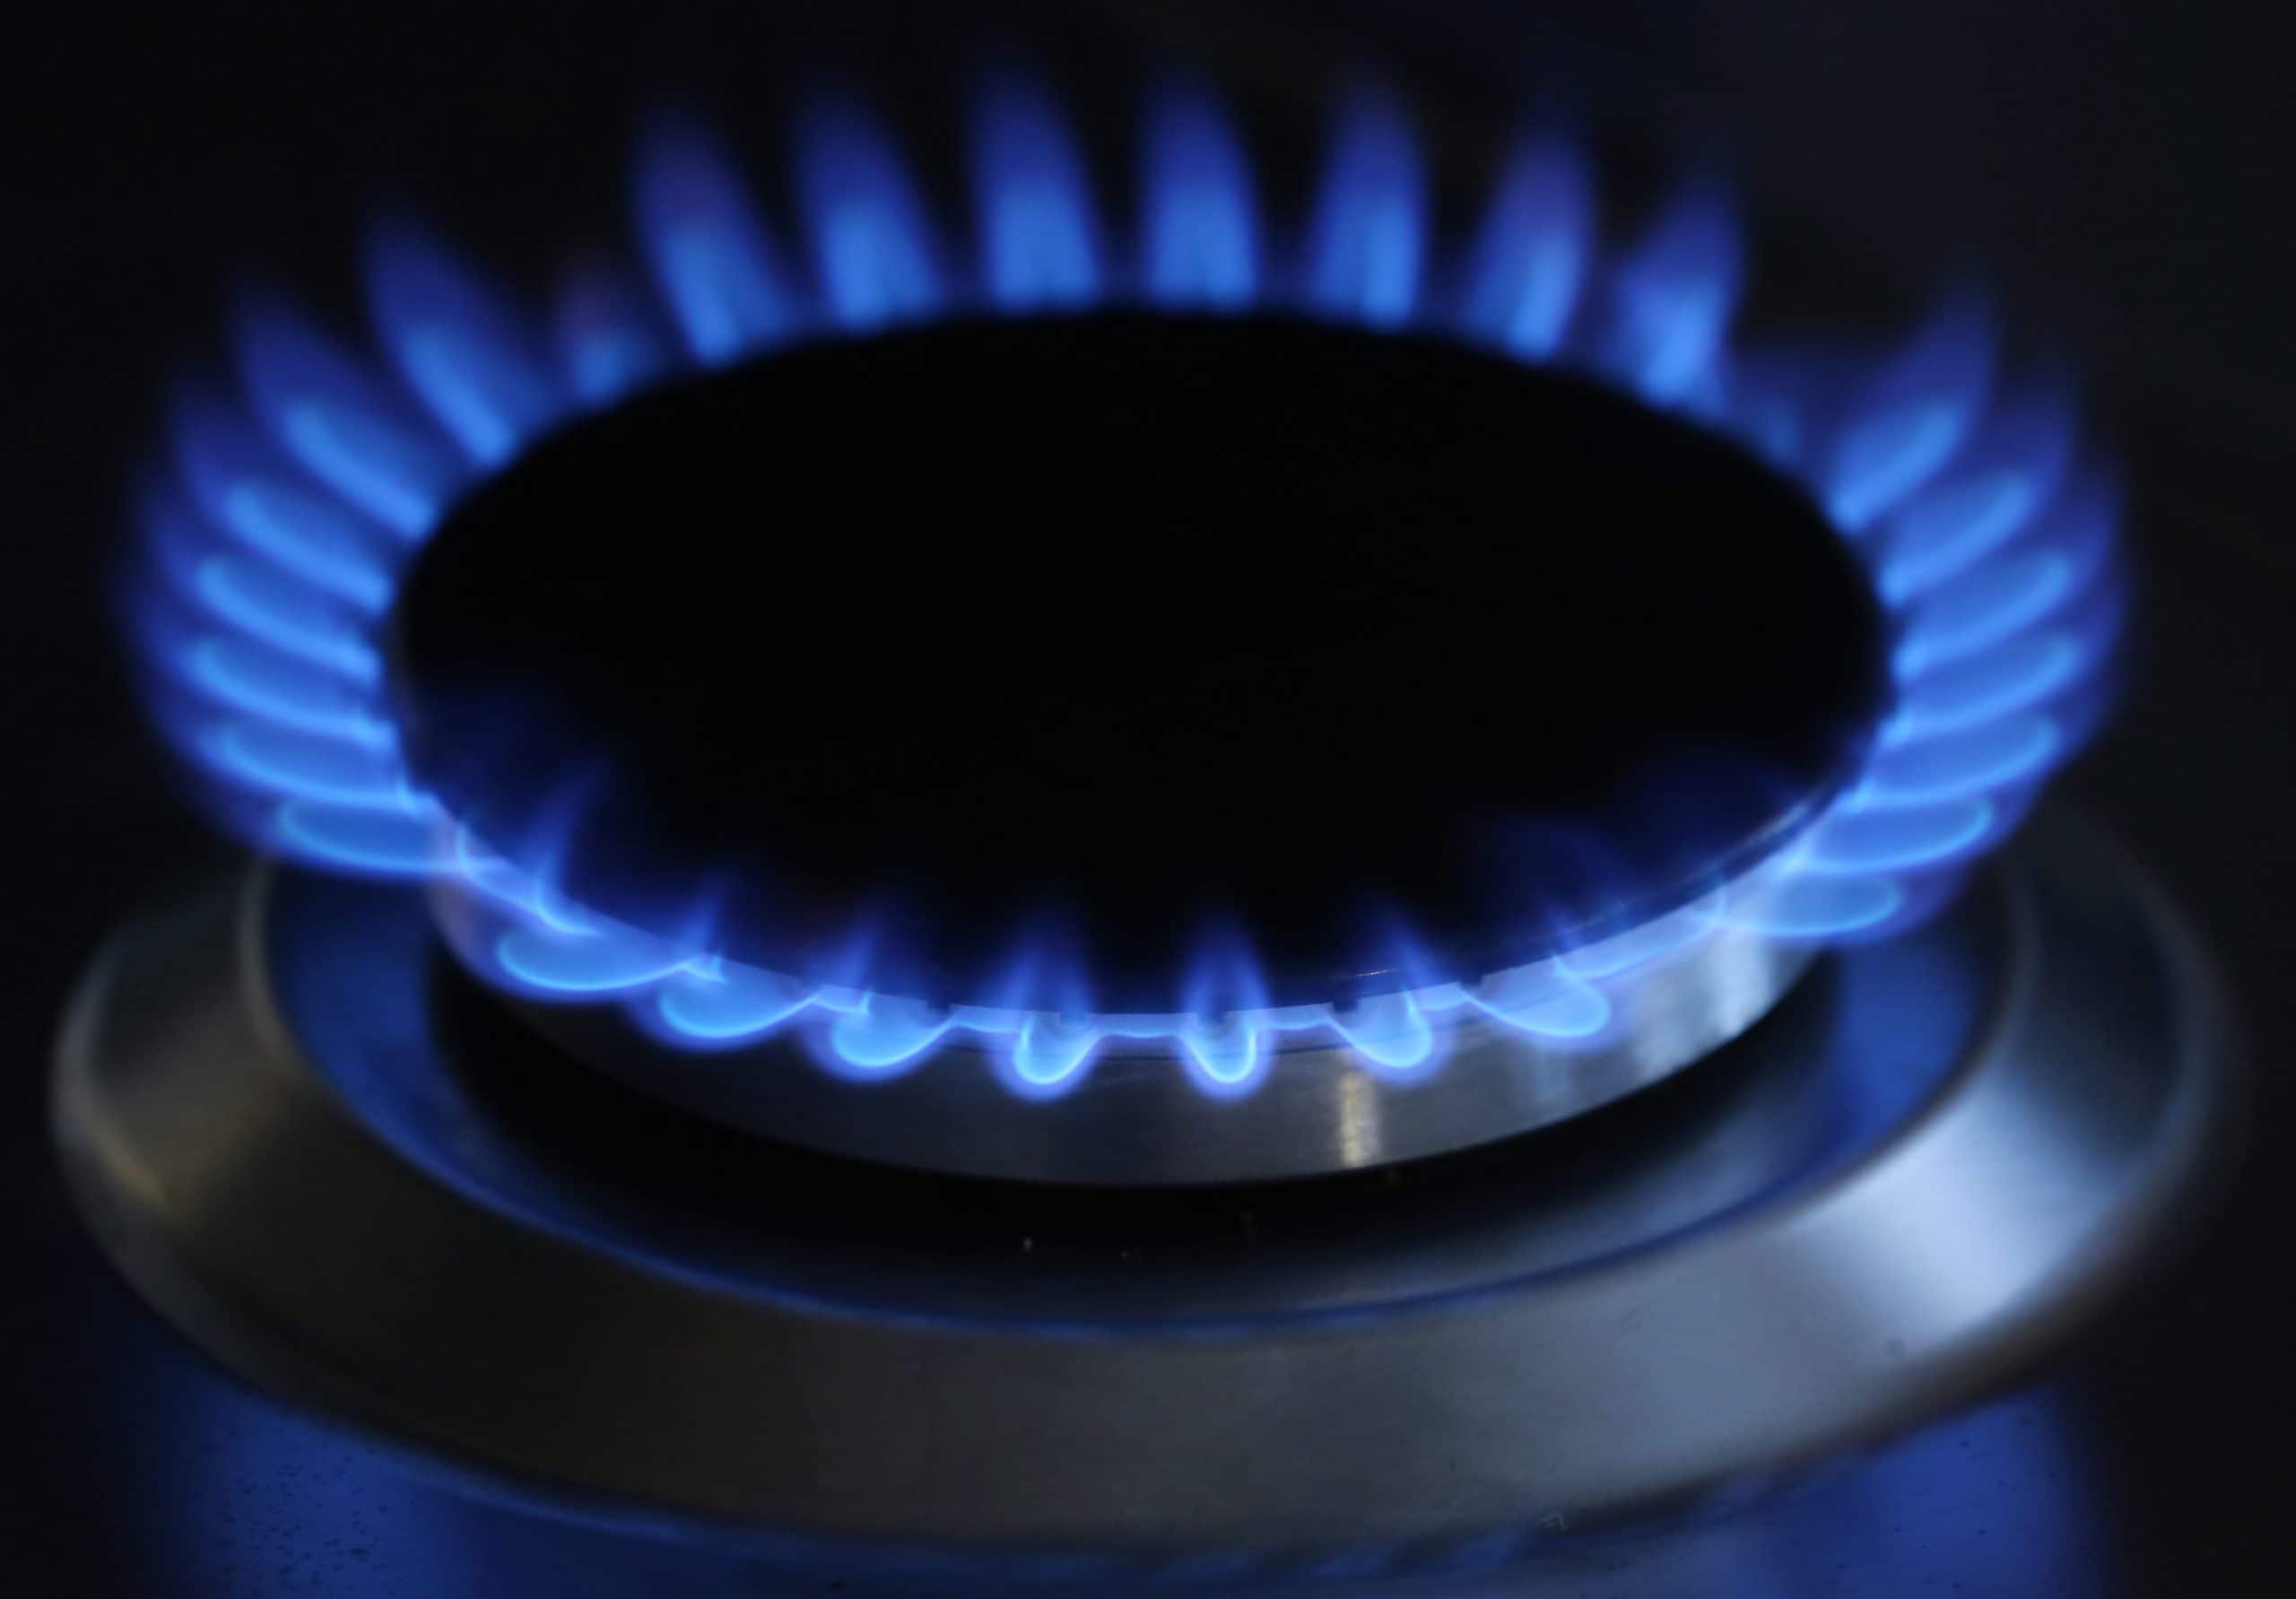 Soaring gas prices may be here to stay, Ofgem chief warns